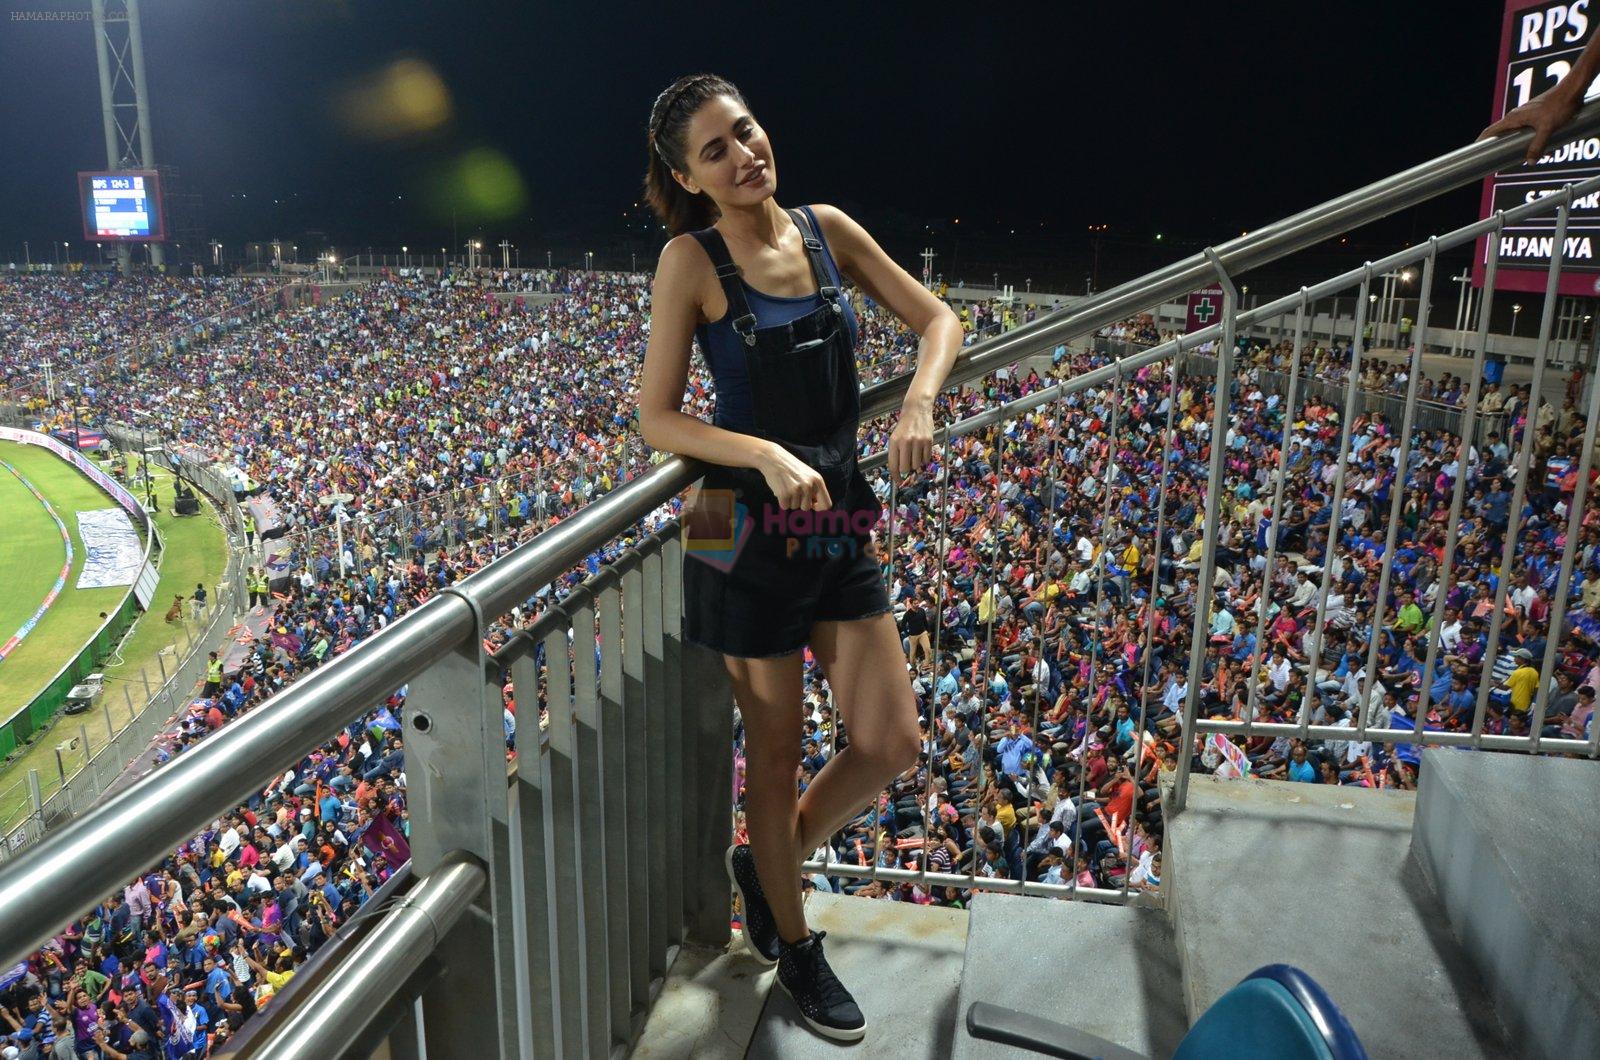 Nargis Fakhri at Azhar promotions in association with Gourmet Renaissance at IPL match in Pune on 9th May 2016